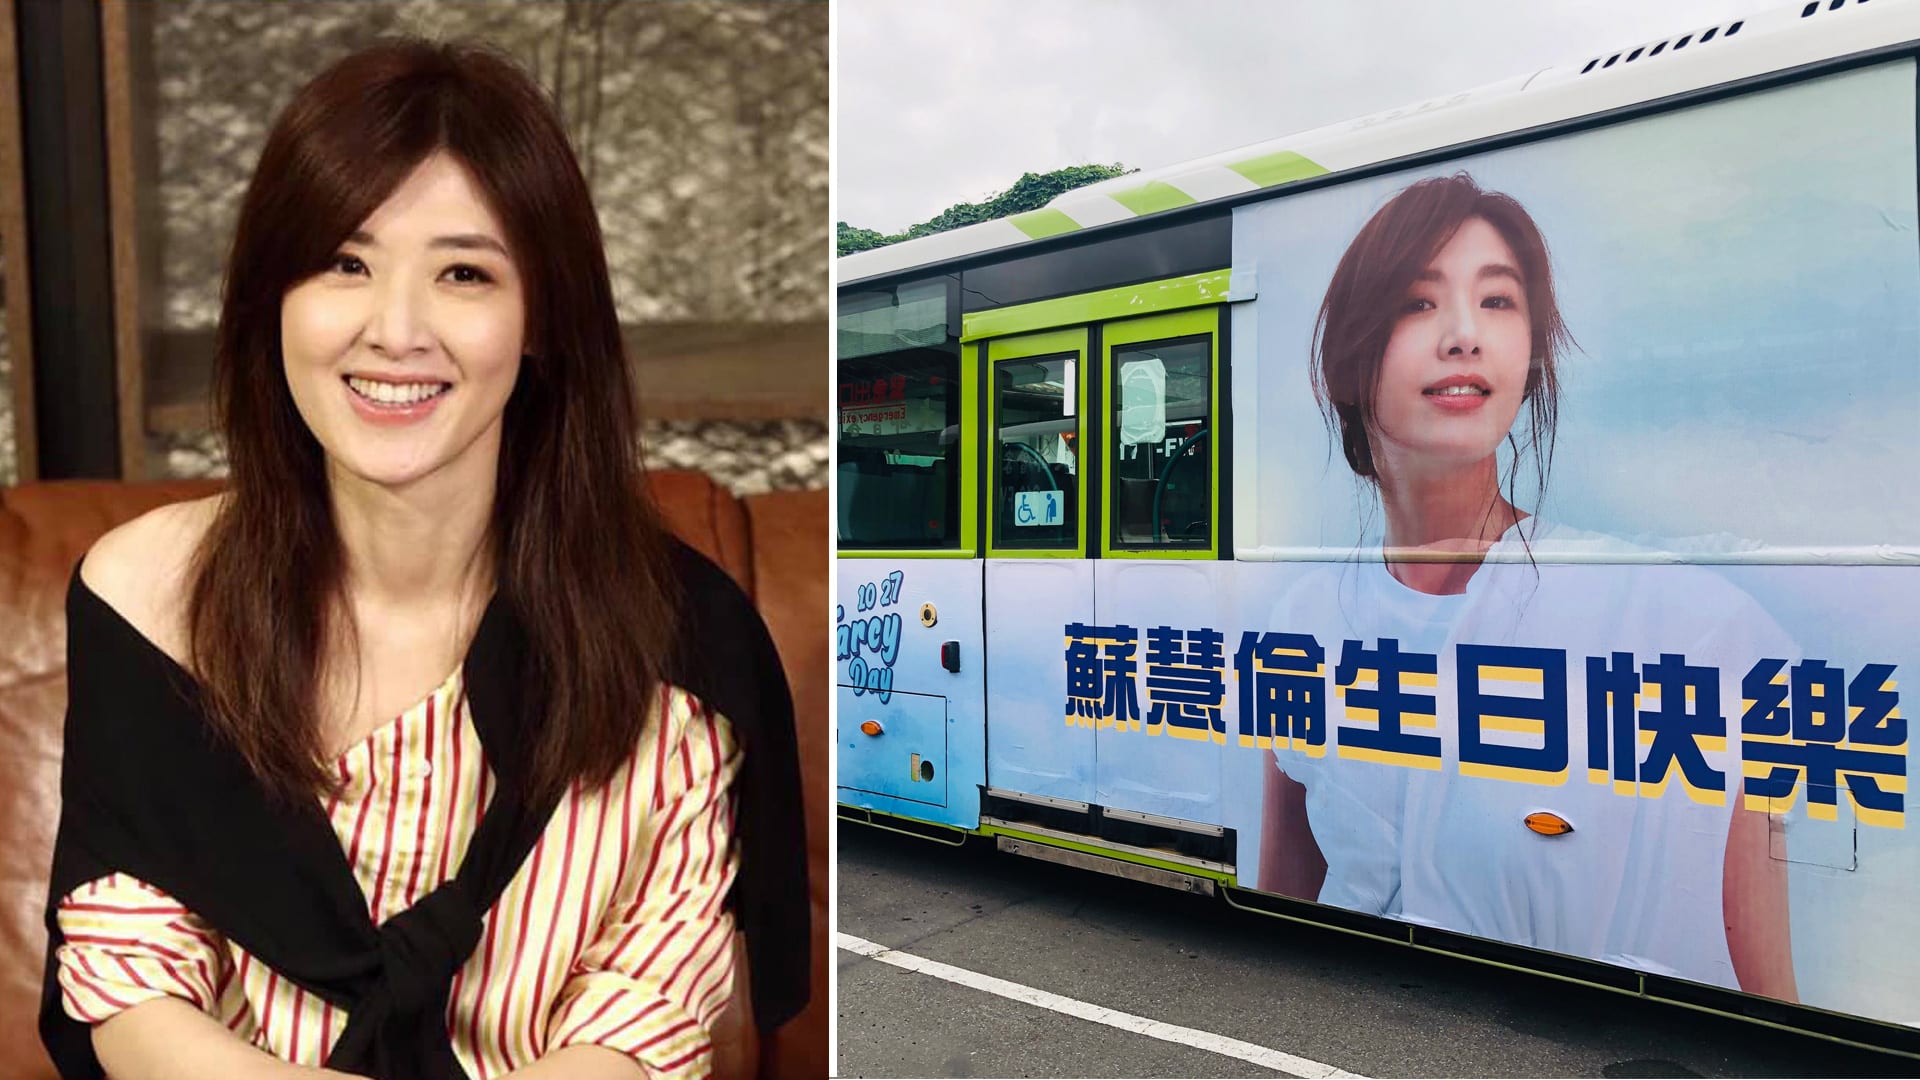 Tarcy Su’s Fans Take Out Bus Ads To Celebrate Her 50th Birthday